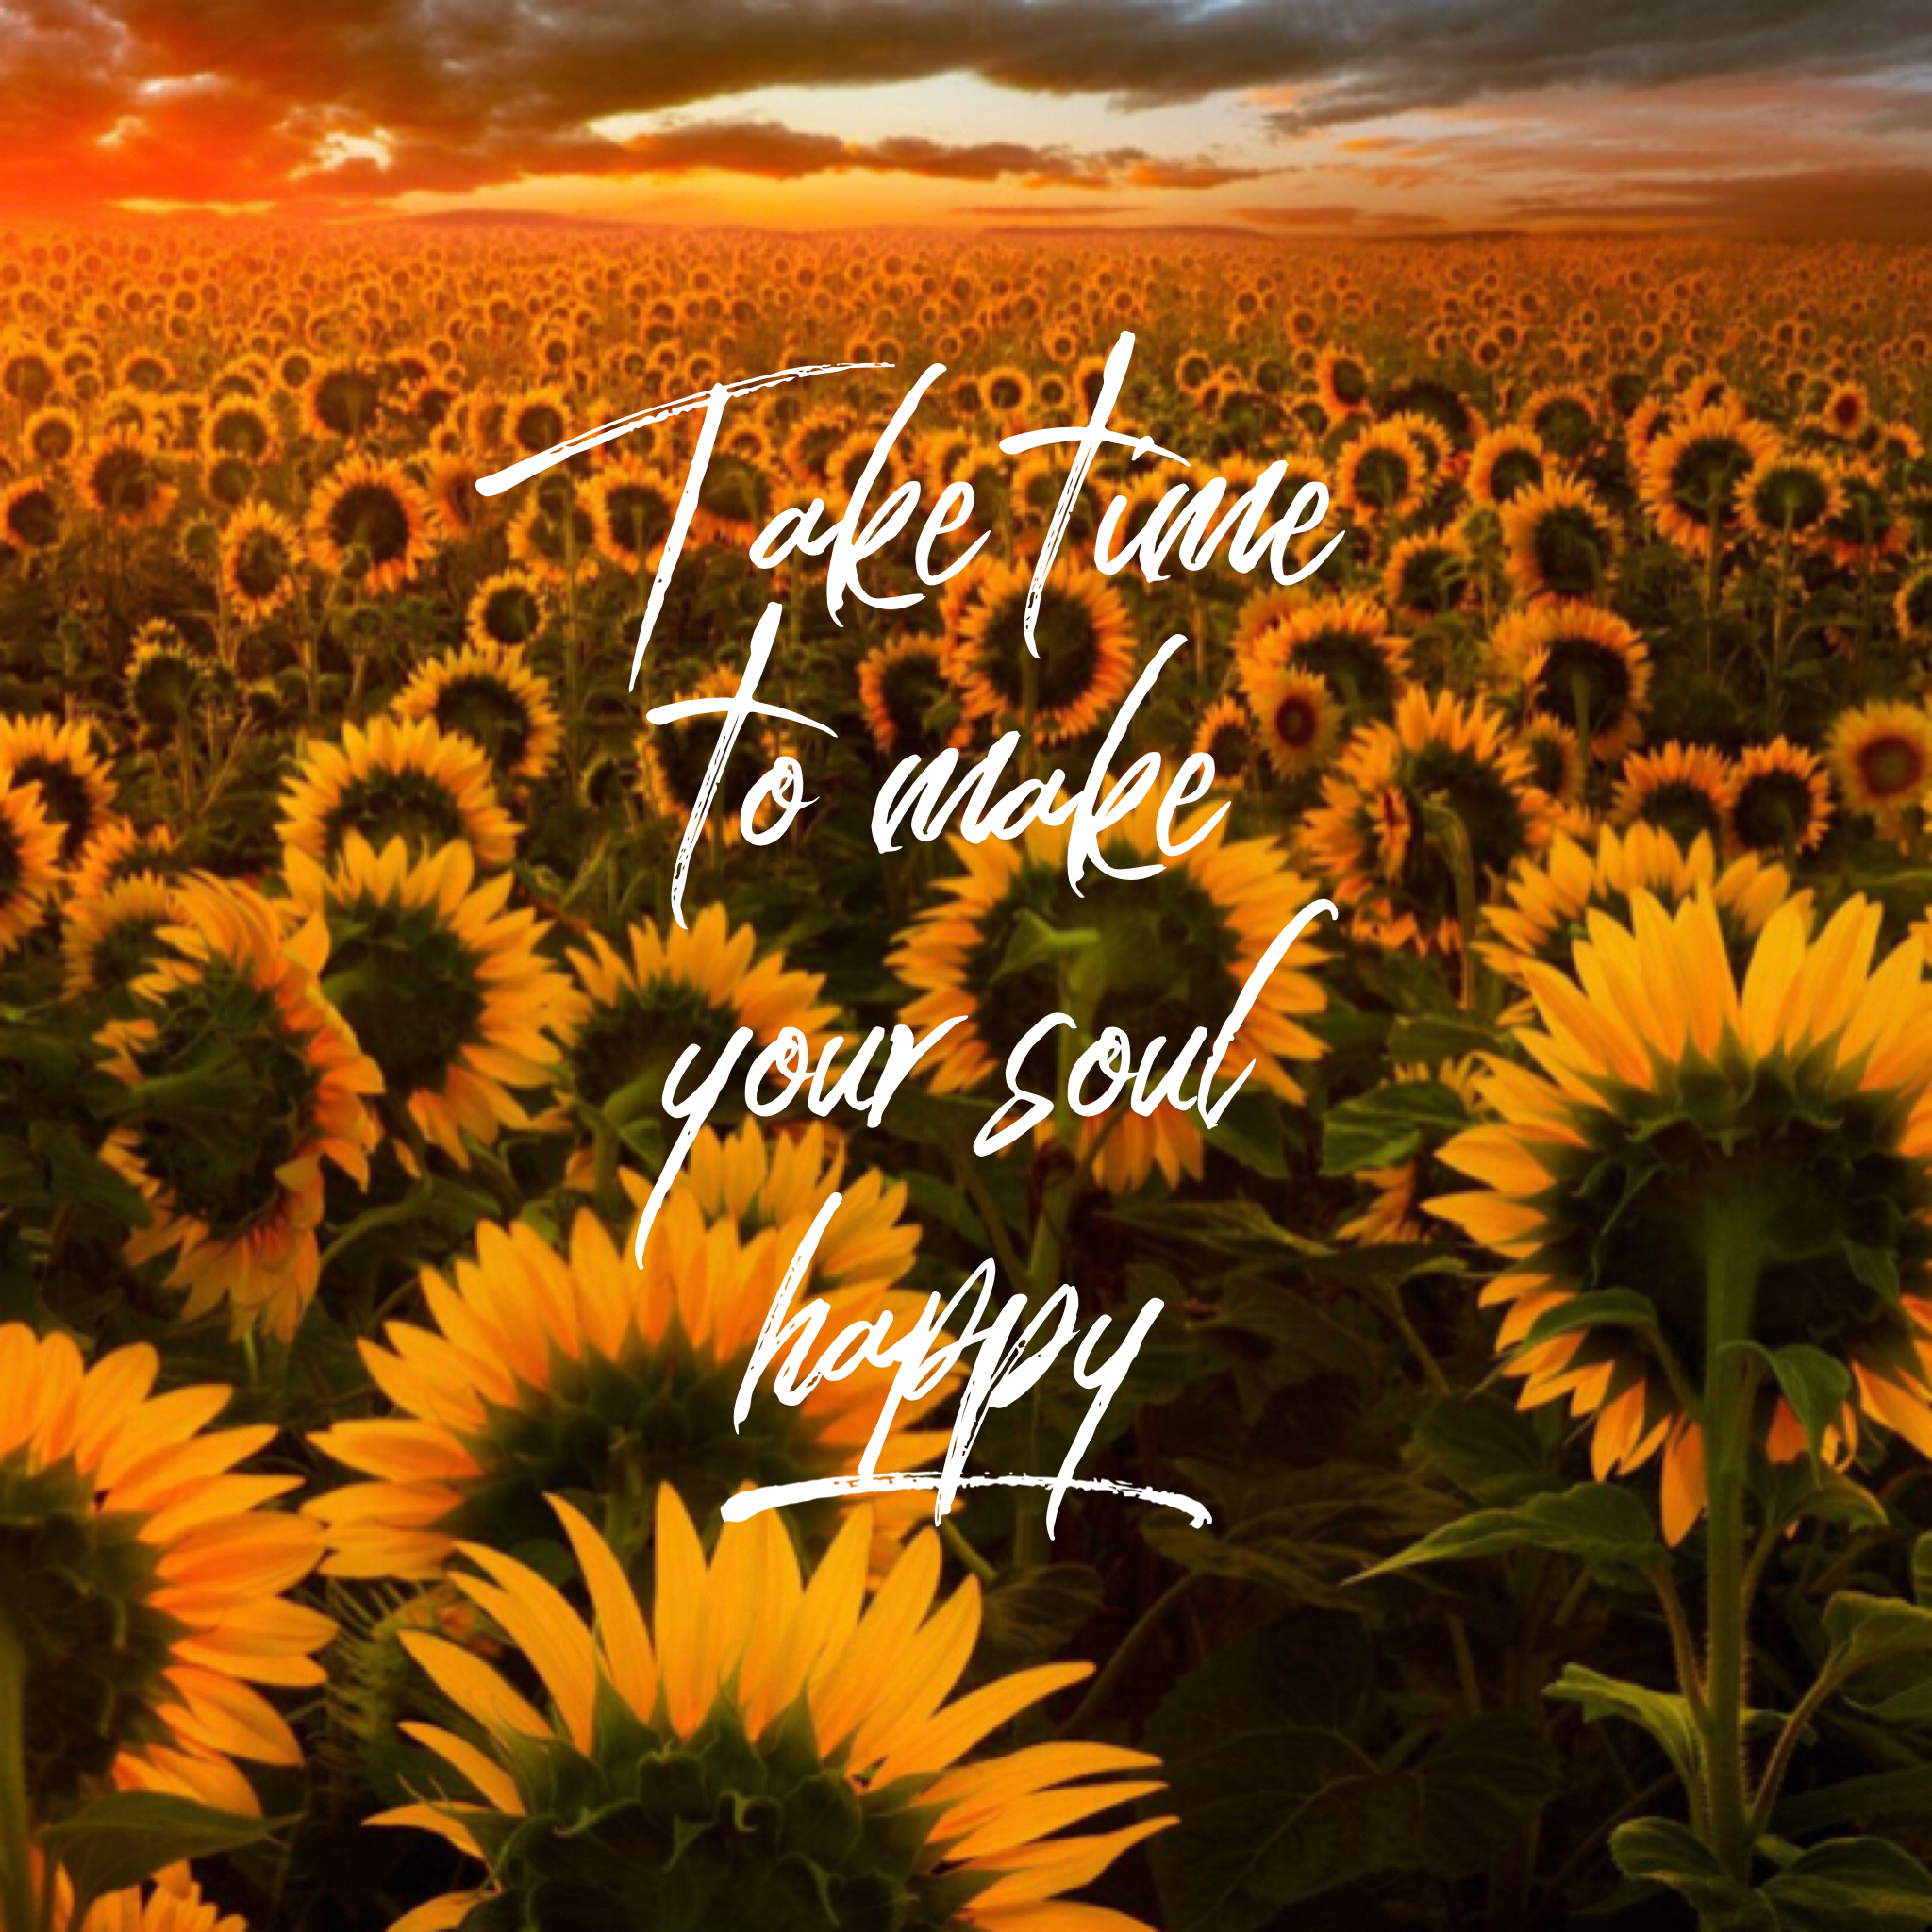 Roses and Sunflower Wallpaper with Quotes